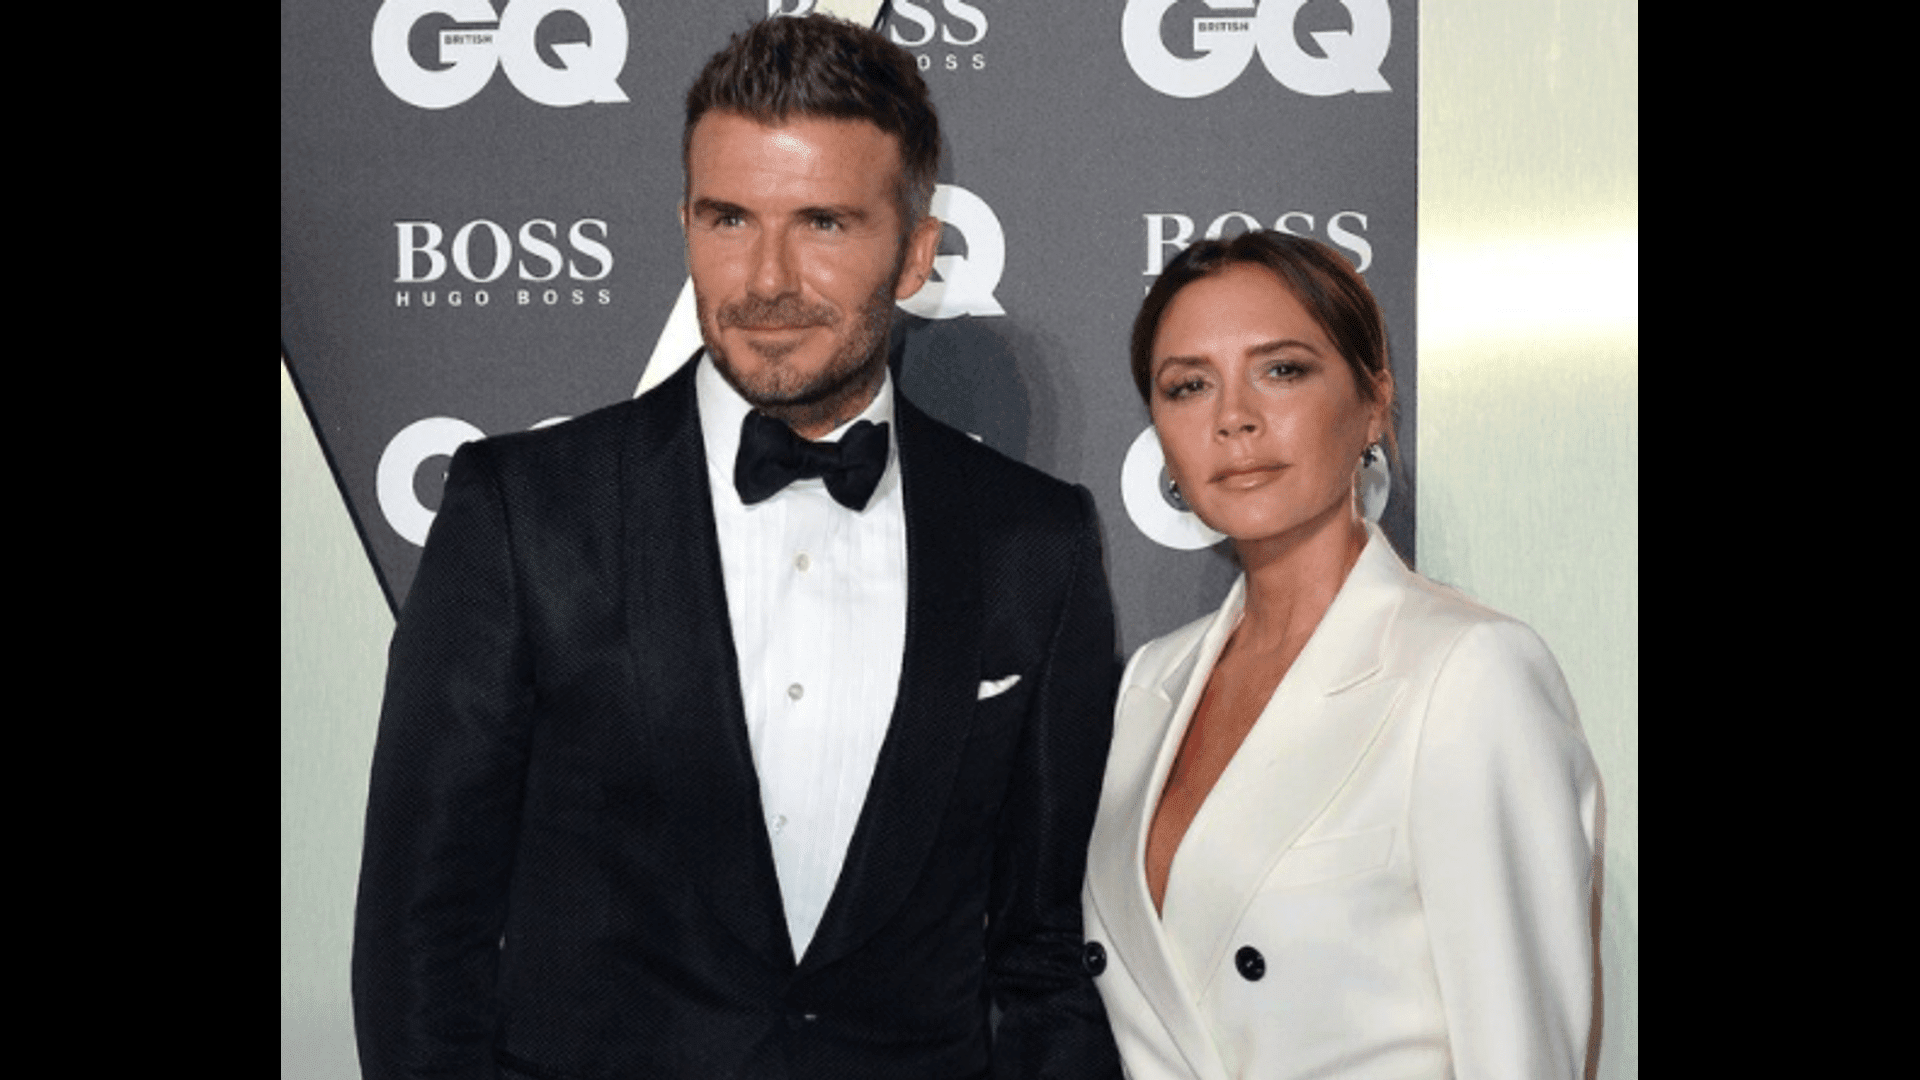 ”the-beckhams-were-victims-of-a-burglary-while-at-their-london-home”